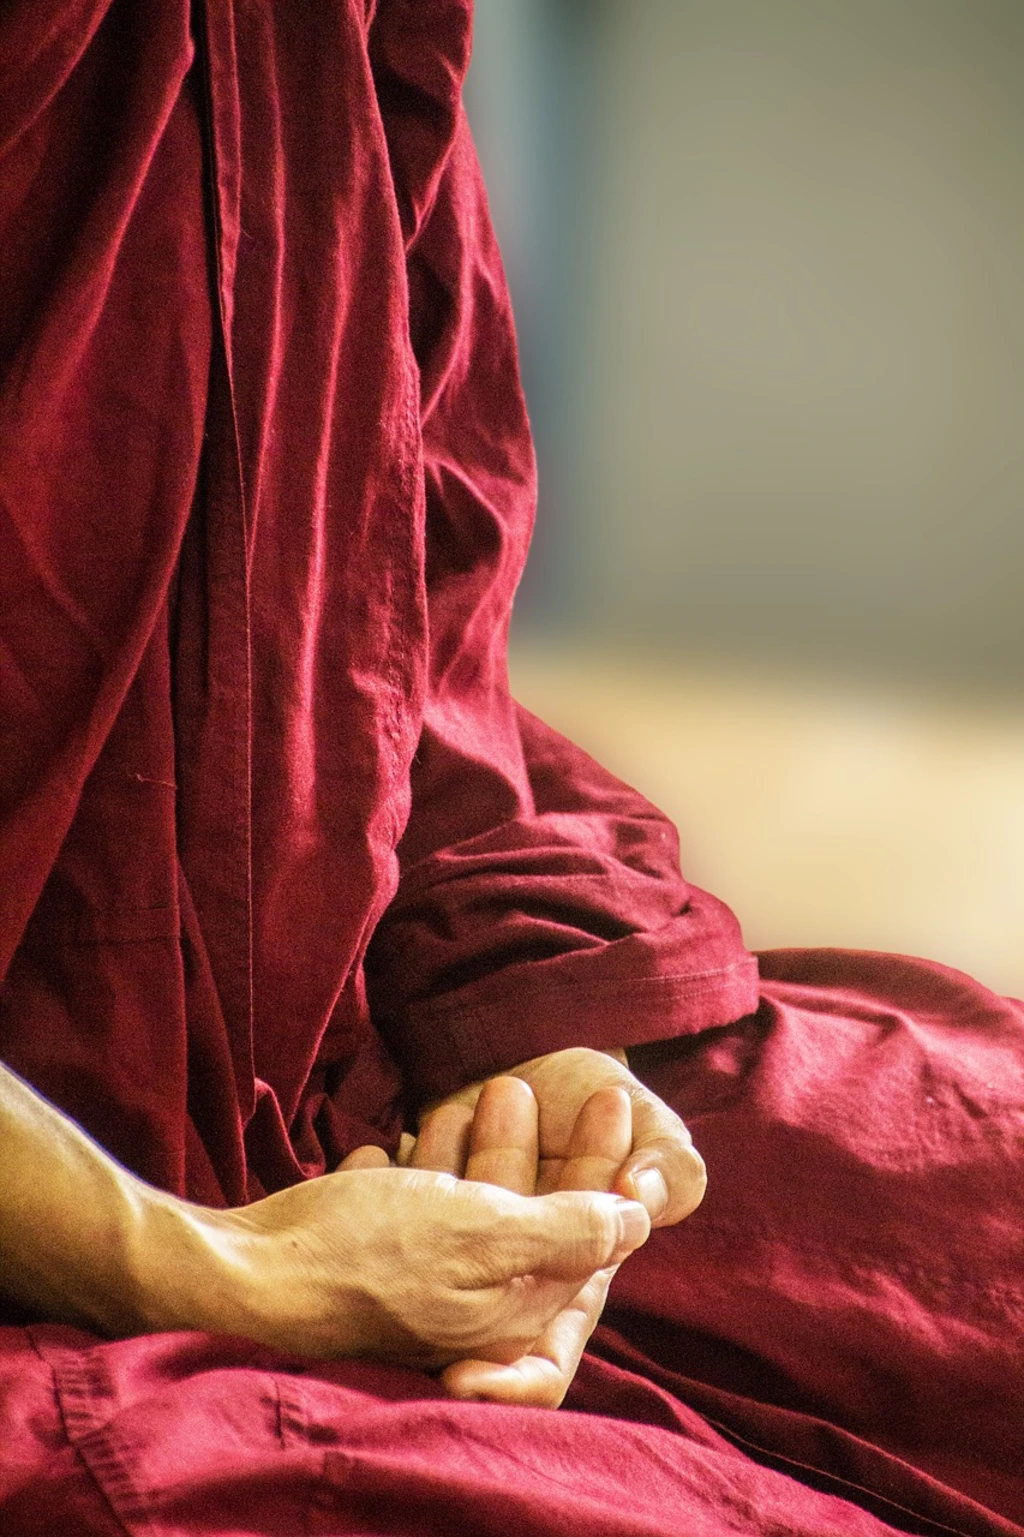 image from Interview: Monk Meditates for 24 Hours